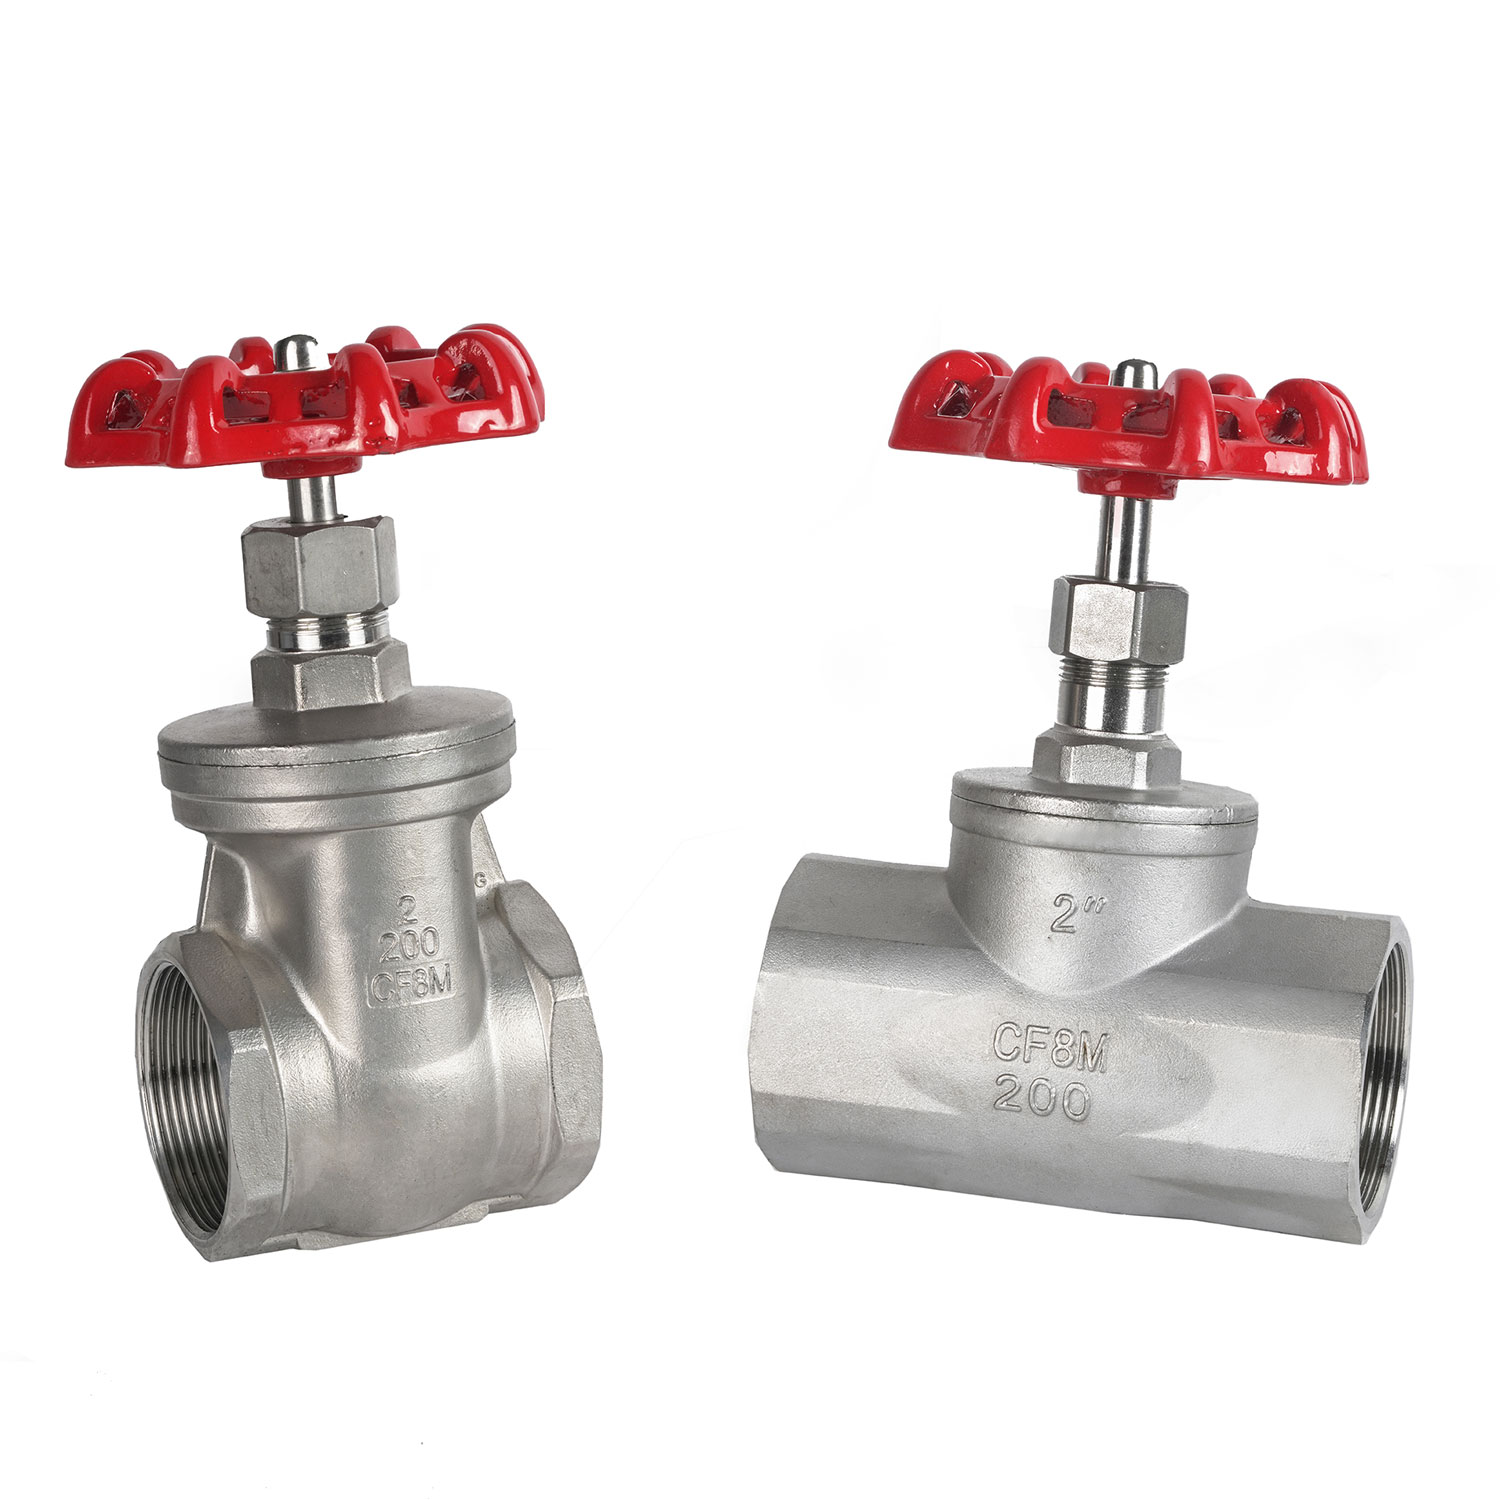 Class 125-200 Stainless Steel Valves